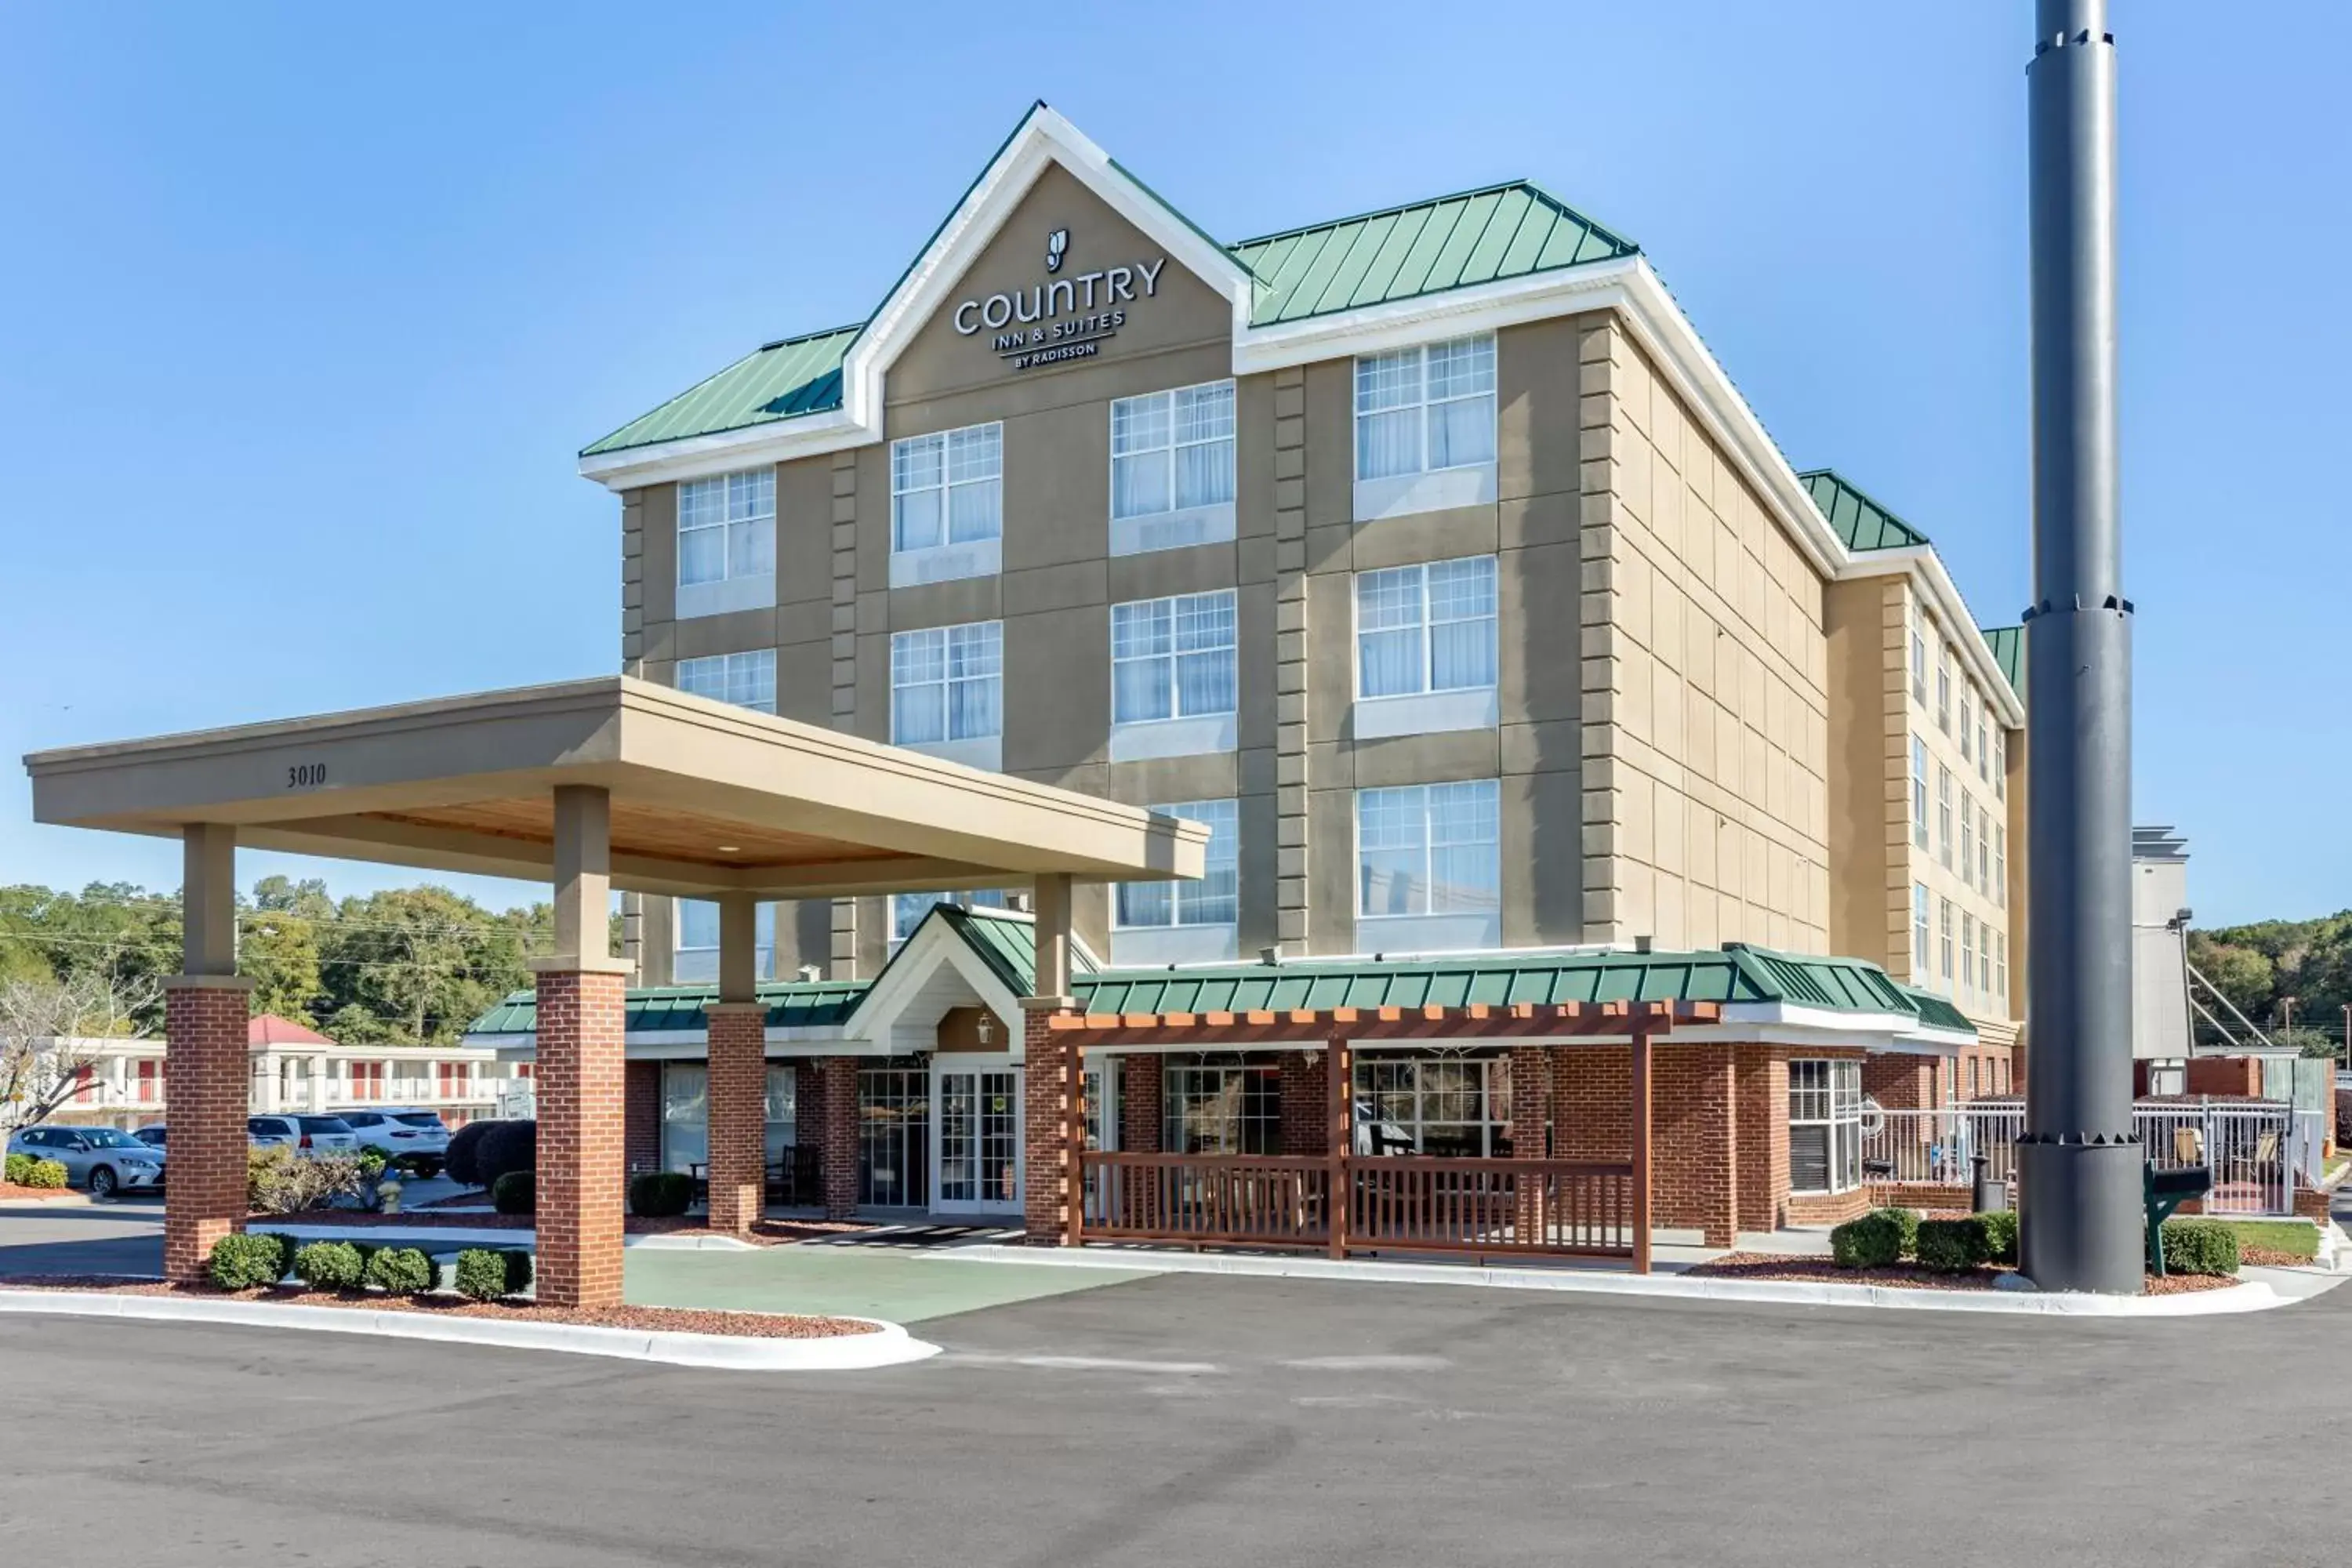 Property Building in Country Inn & Suites by Radisson, Lumberton, NC